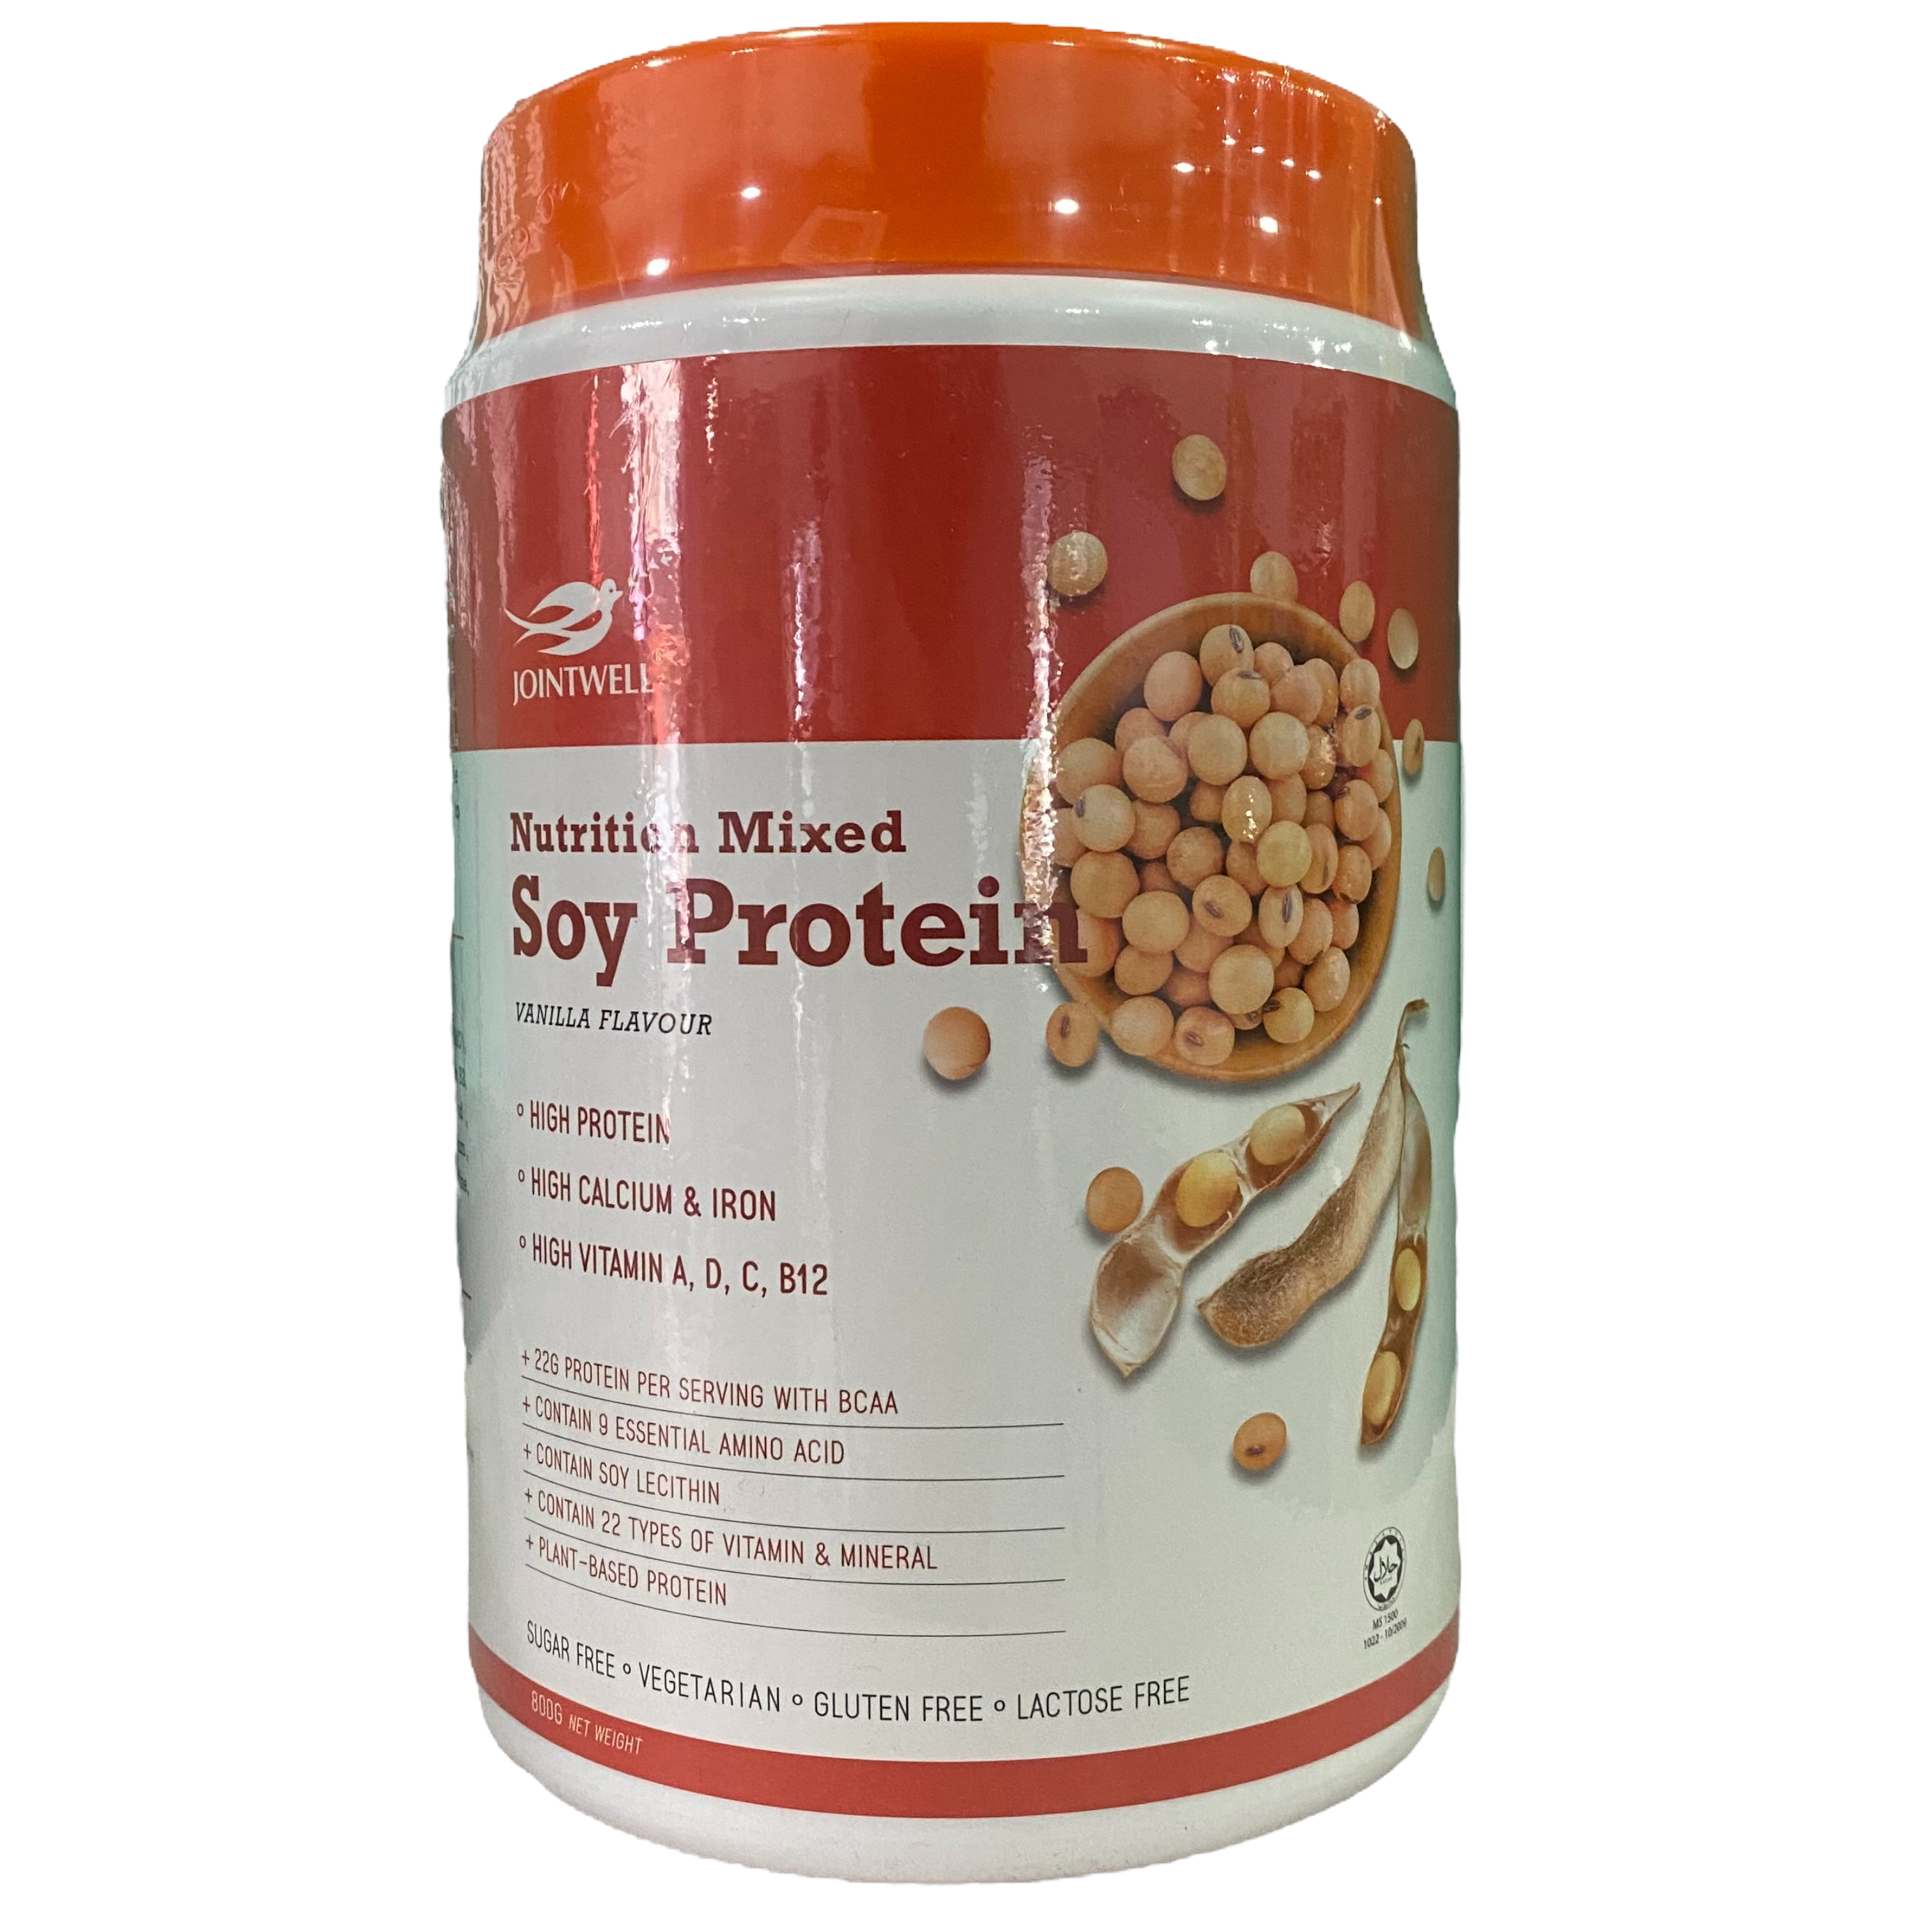 Soy　Jointwell　District　Vegan　Protein　800g　Malaysia